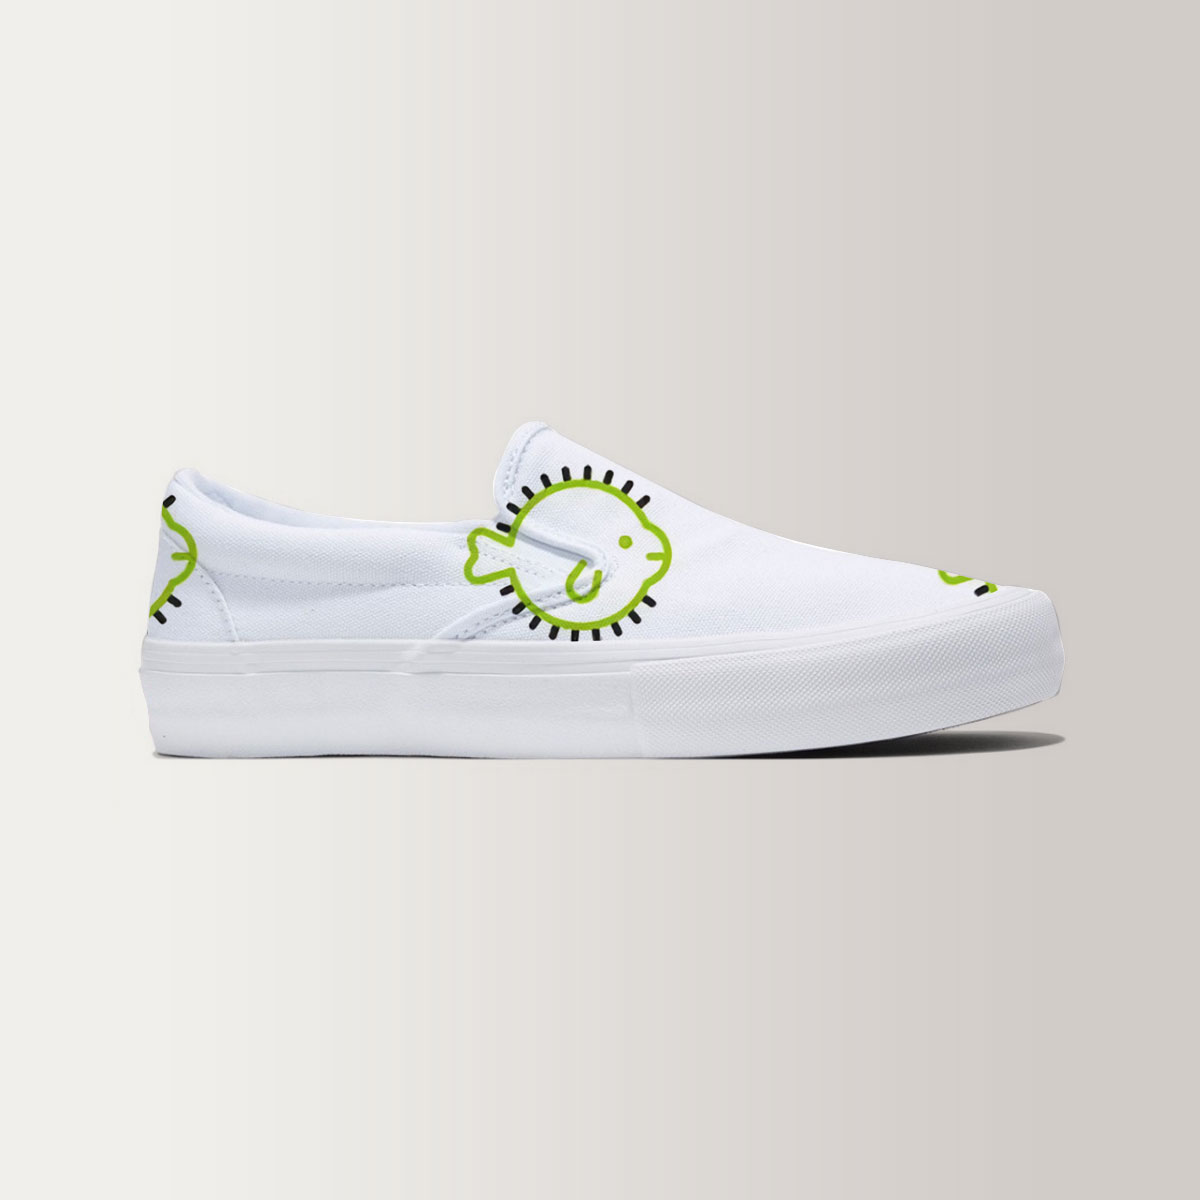 Funny Green Puffer Fish Slip On Sneakers